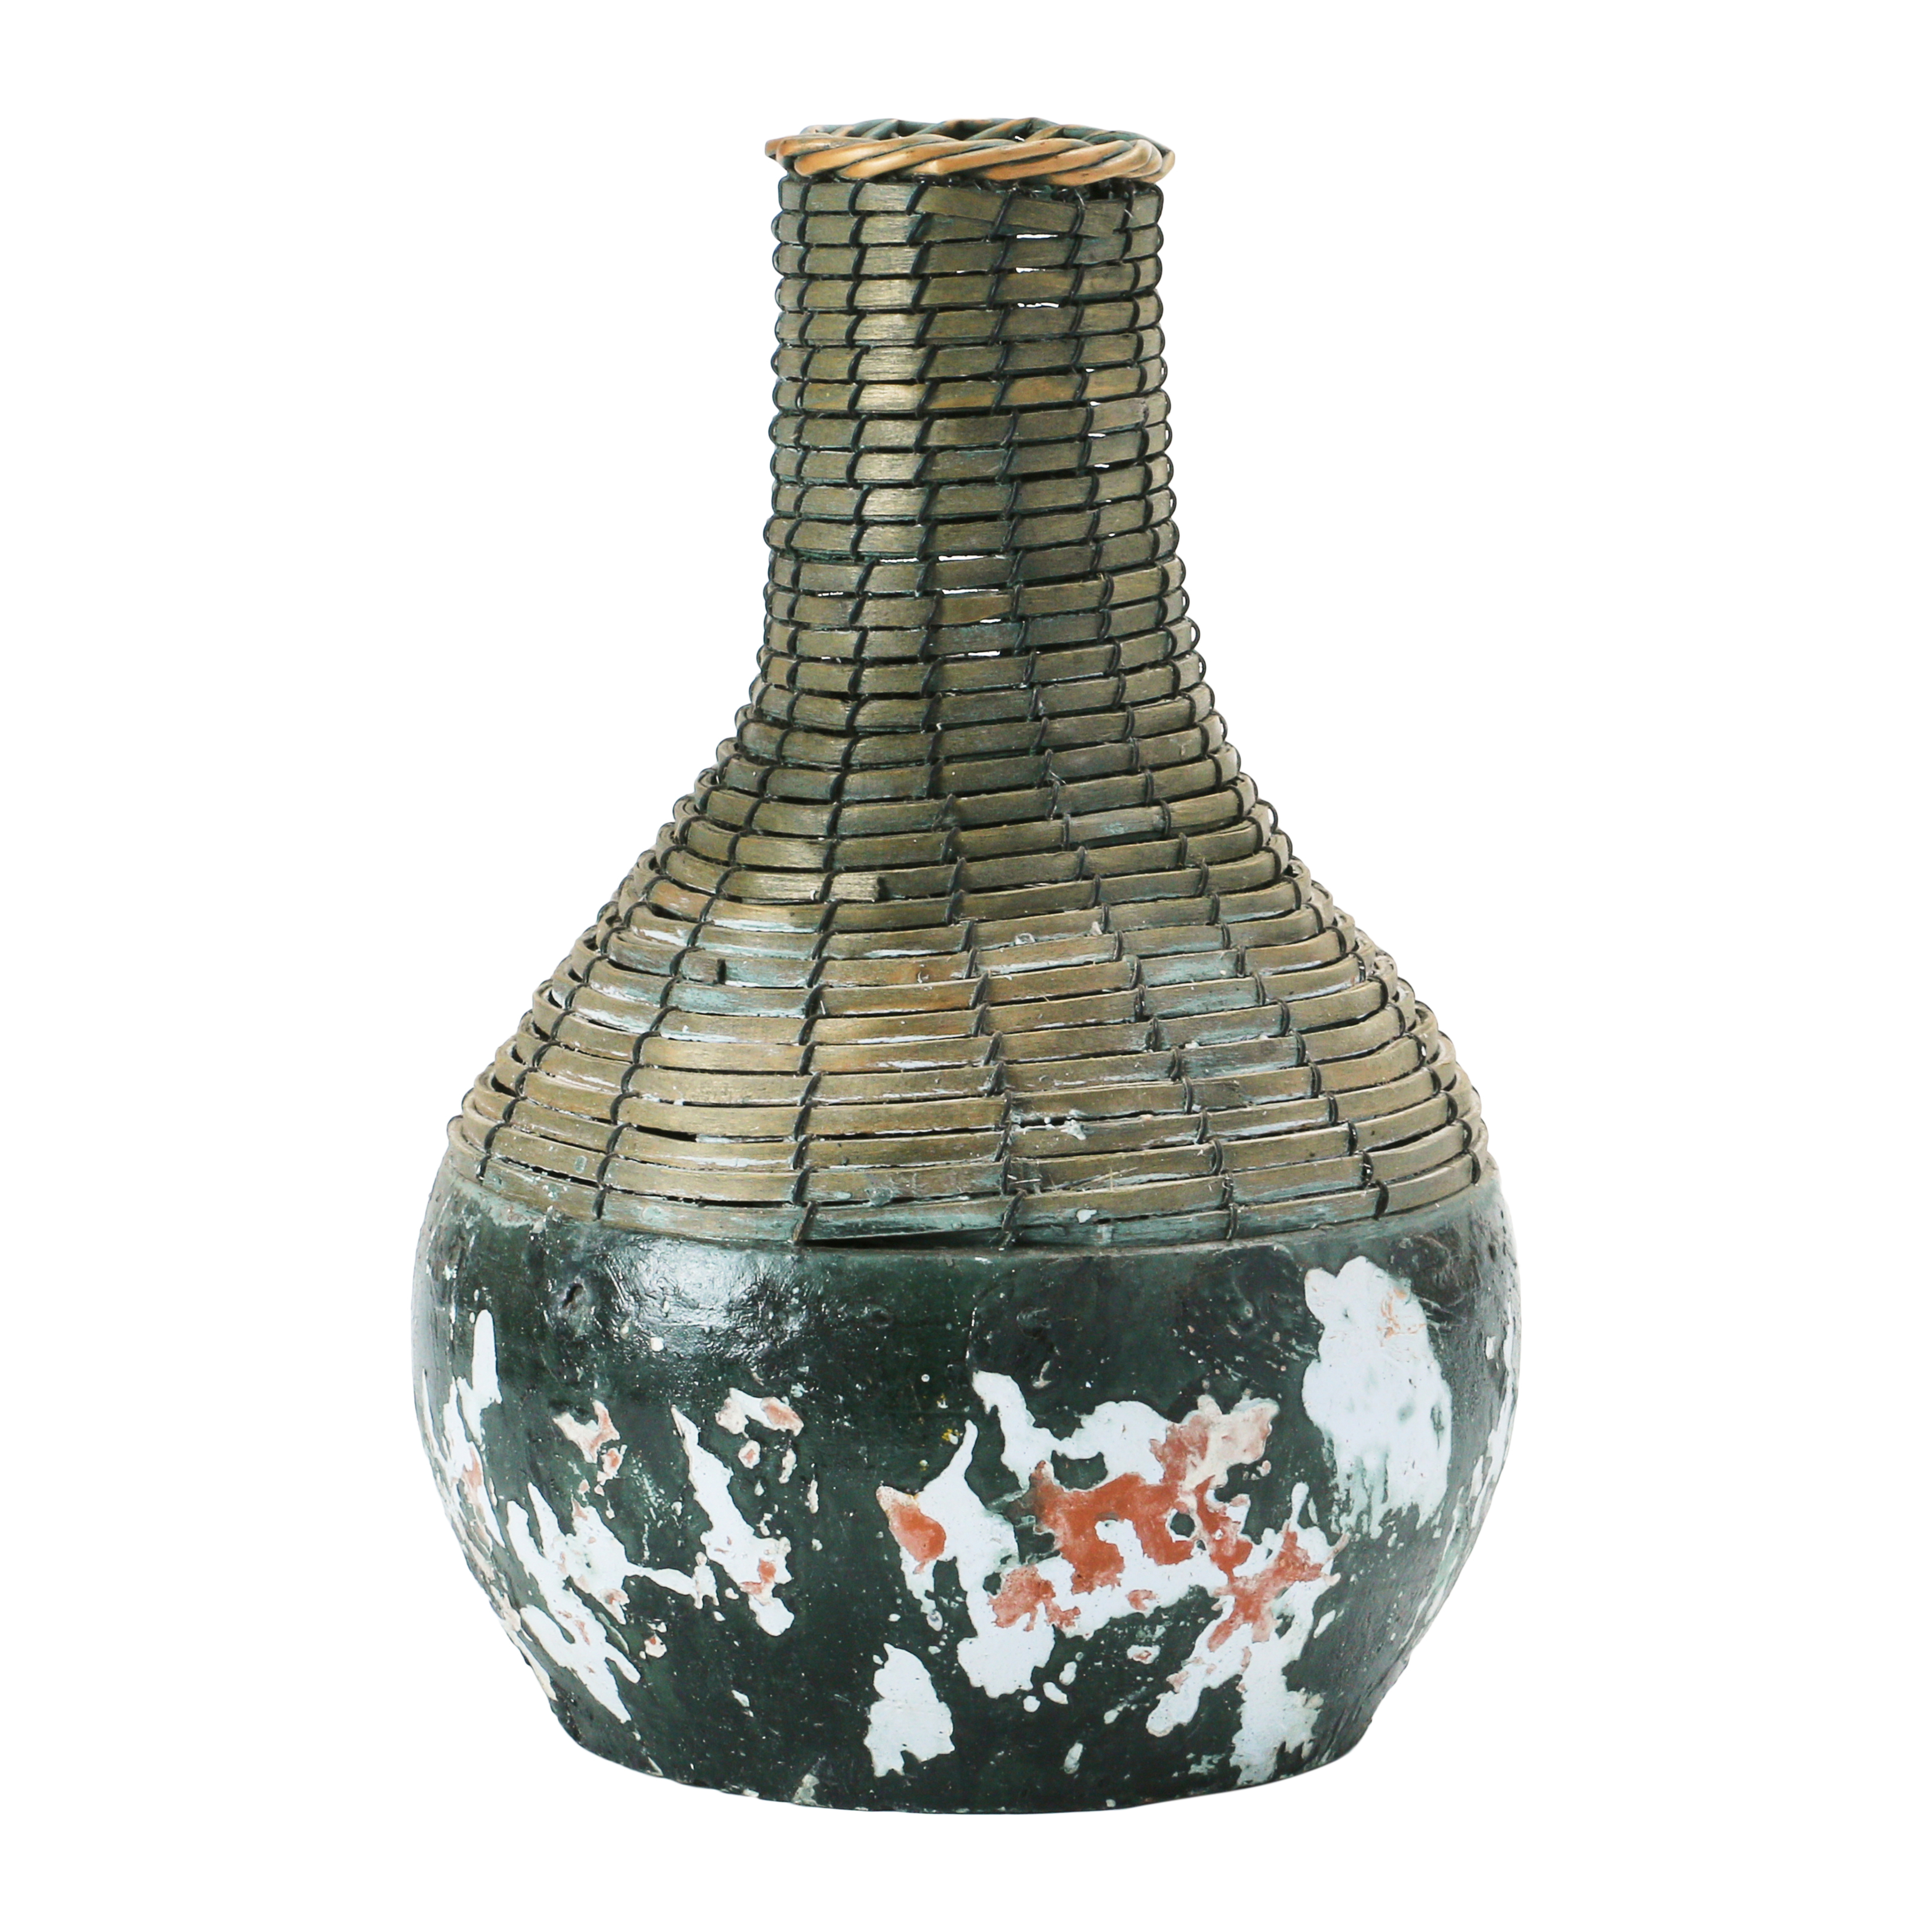 Hand-Woven Rattan & Clay Vase, Distressed Black (Each One Will Vary) - Nomad Home